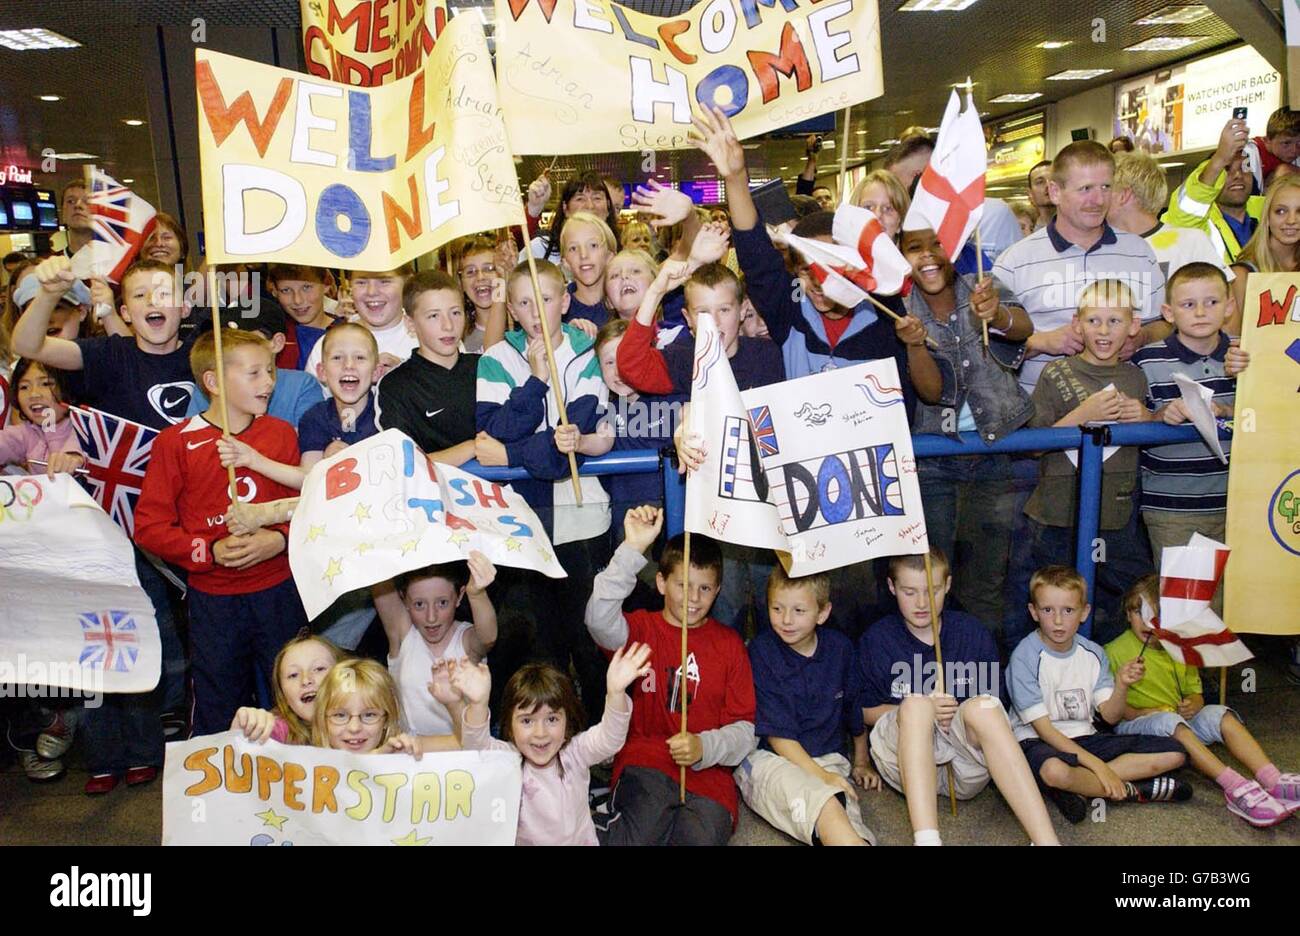 Olympic swimmers return home. Supporters welcome back British Olympic swimmers returning from the Athens games at Manchester Airport. Stock Photo